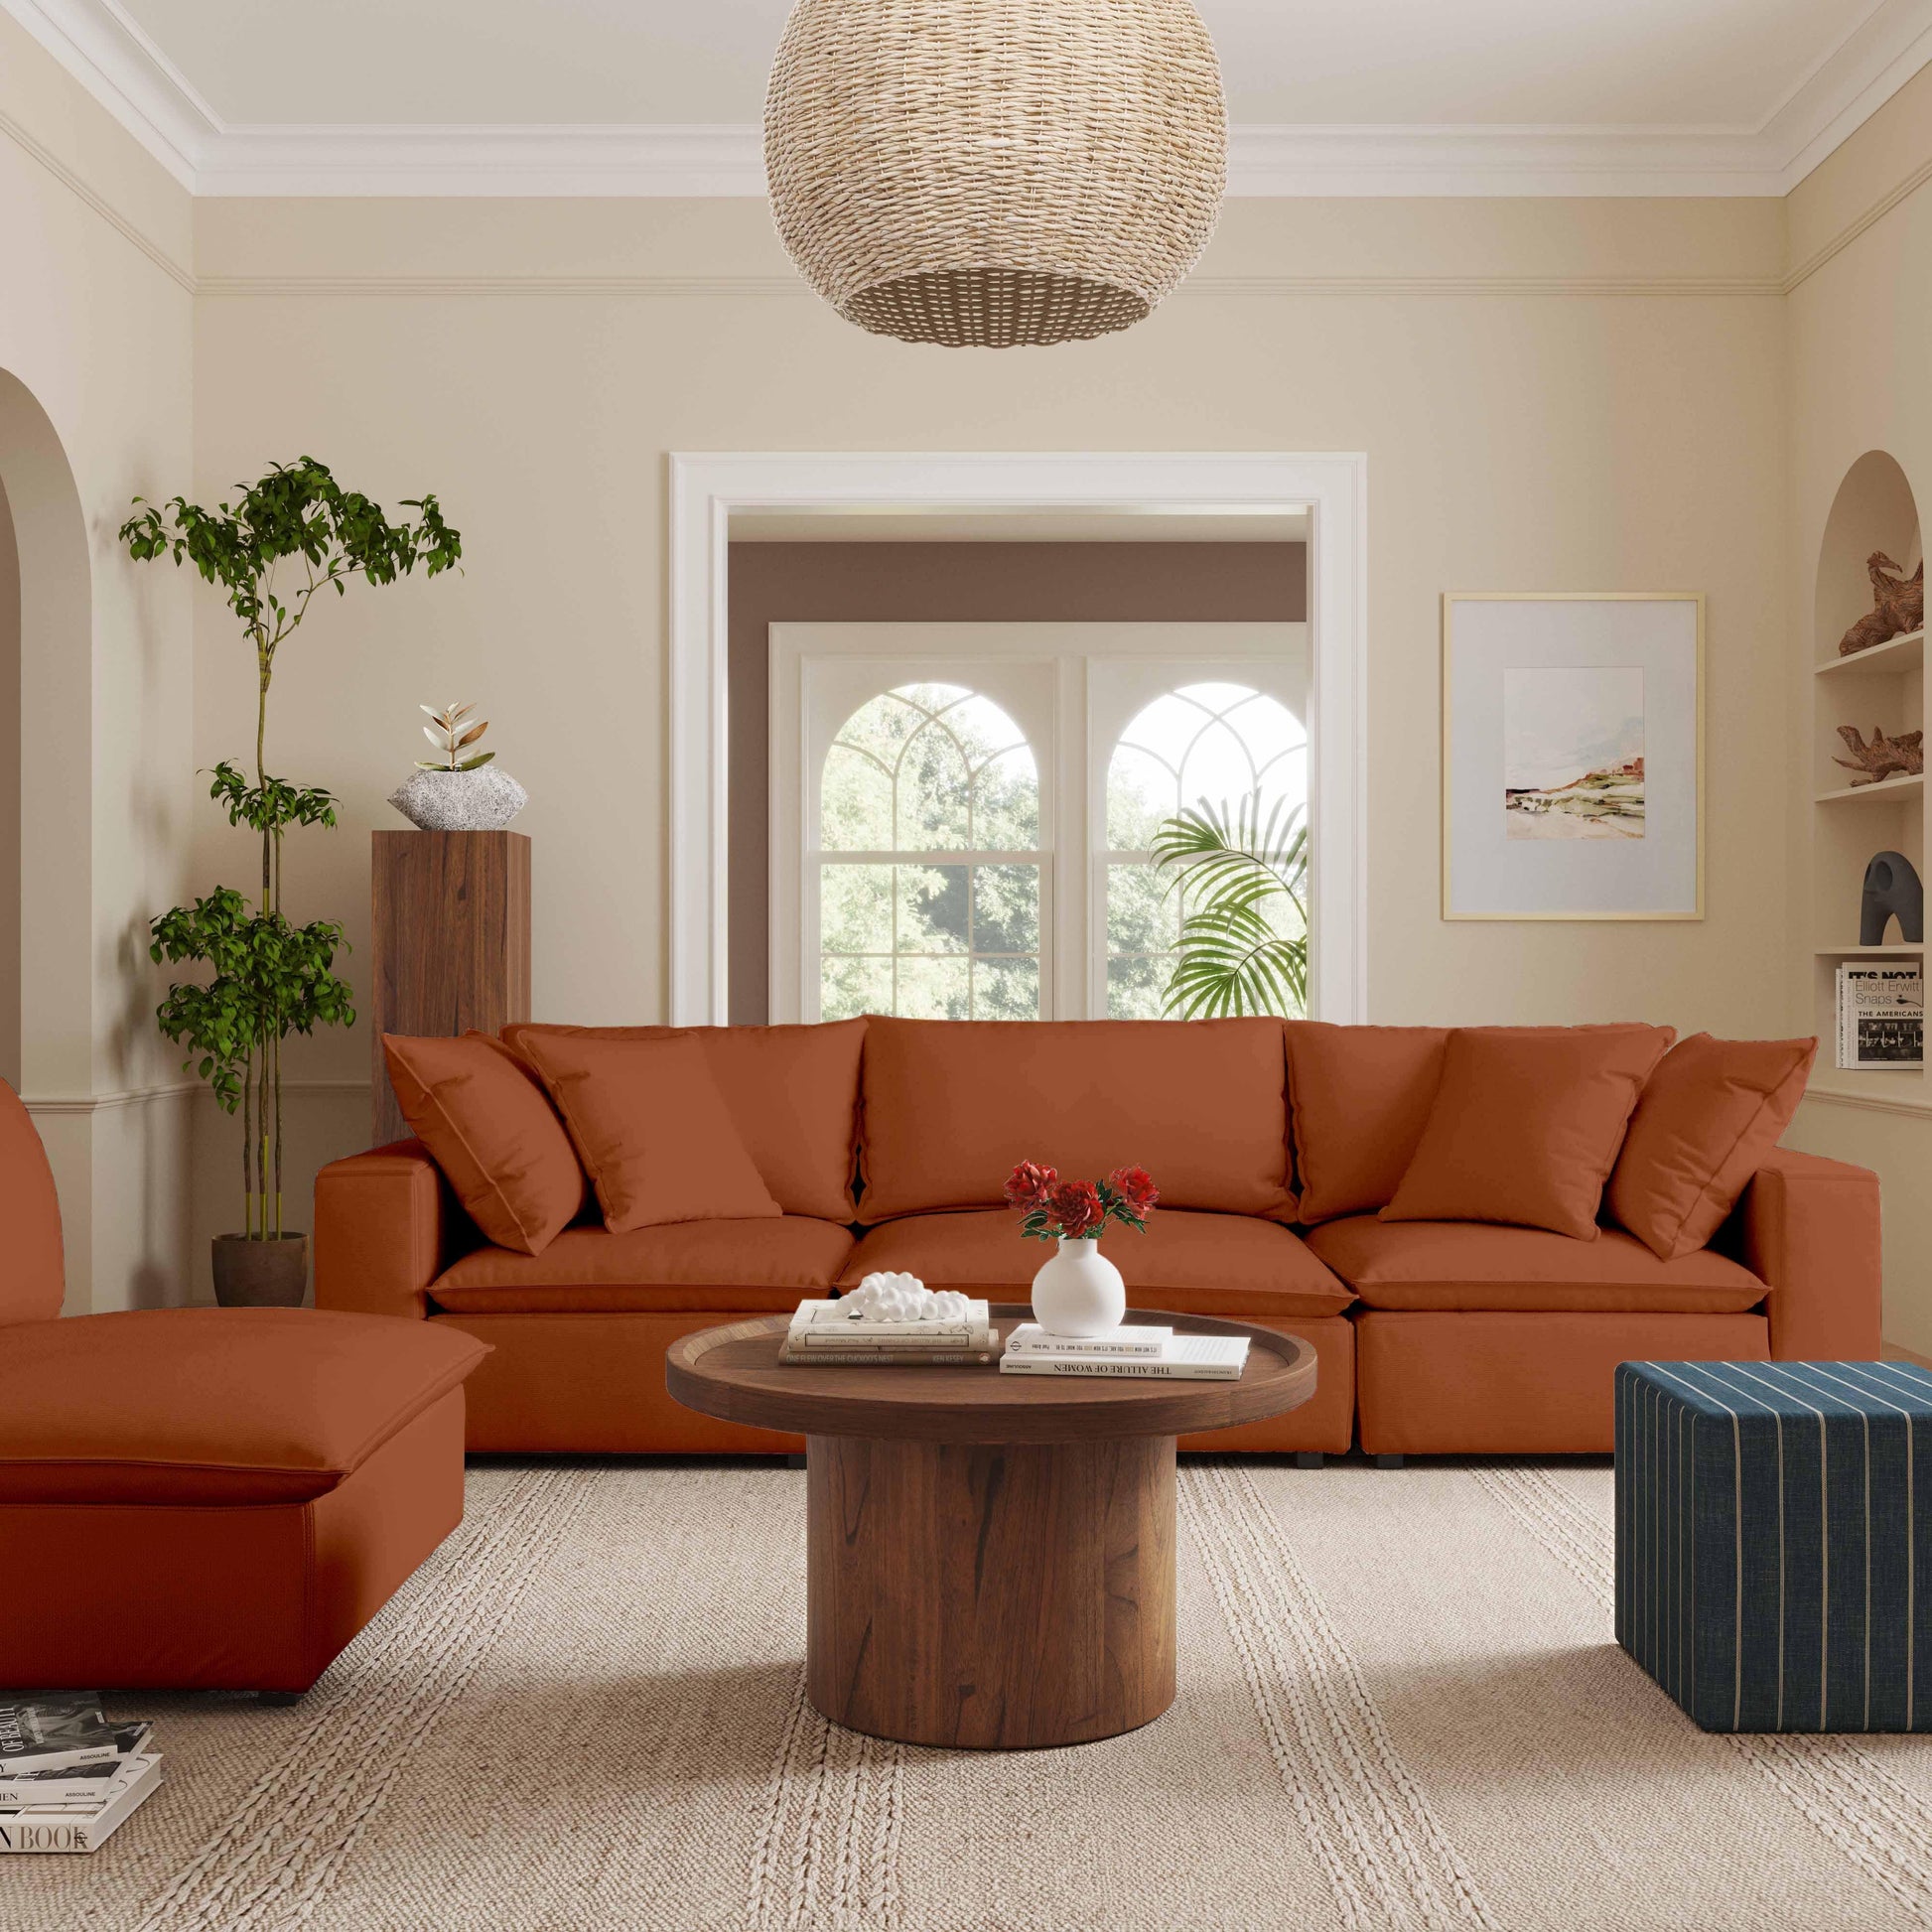 Cali Rust Modular 4 Piece Sectional by TOV